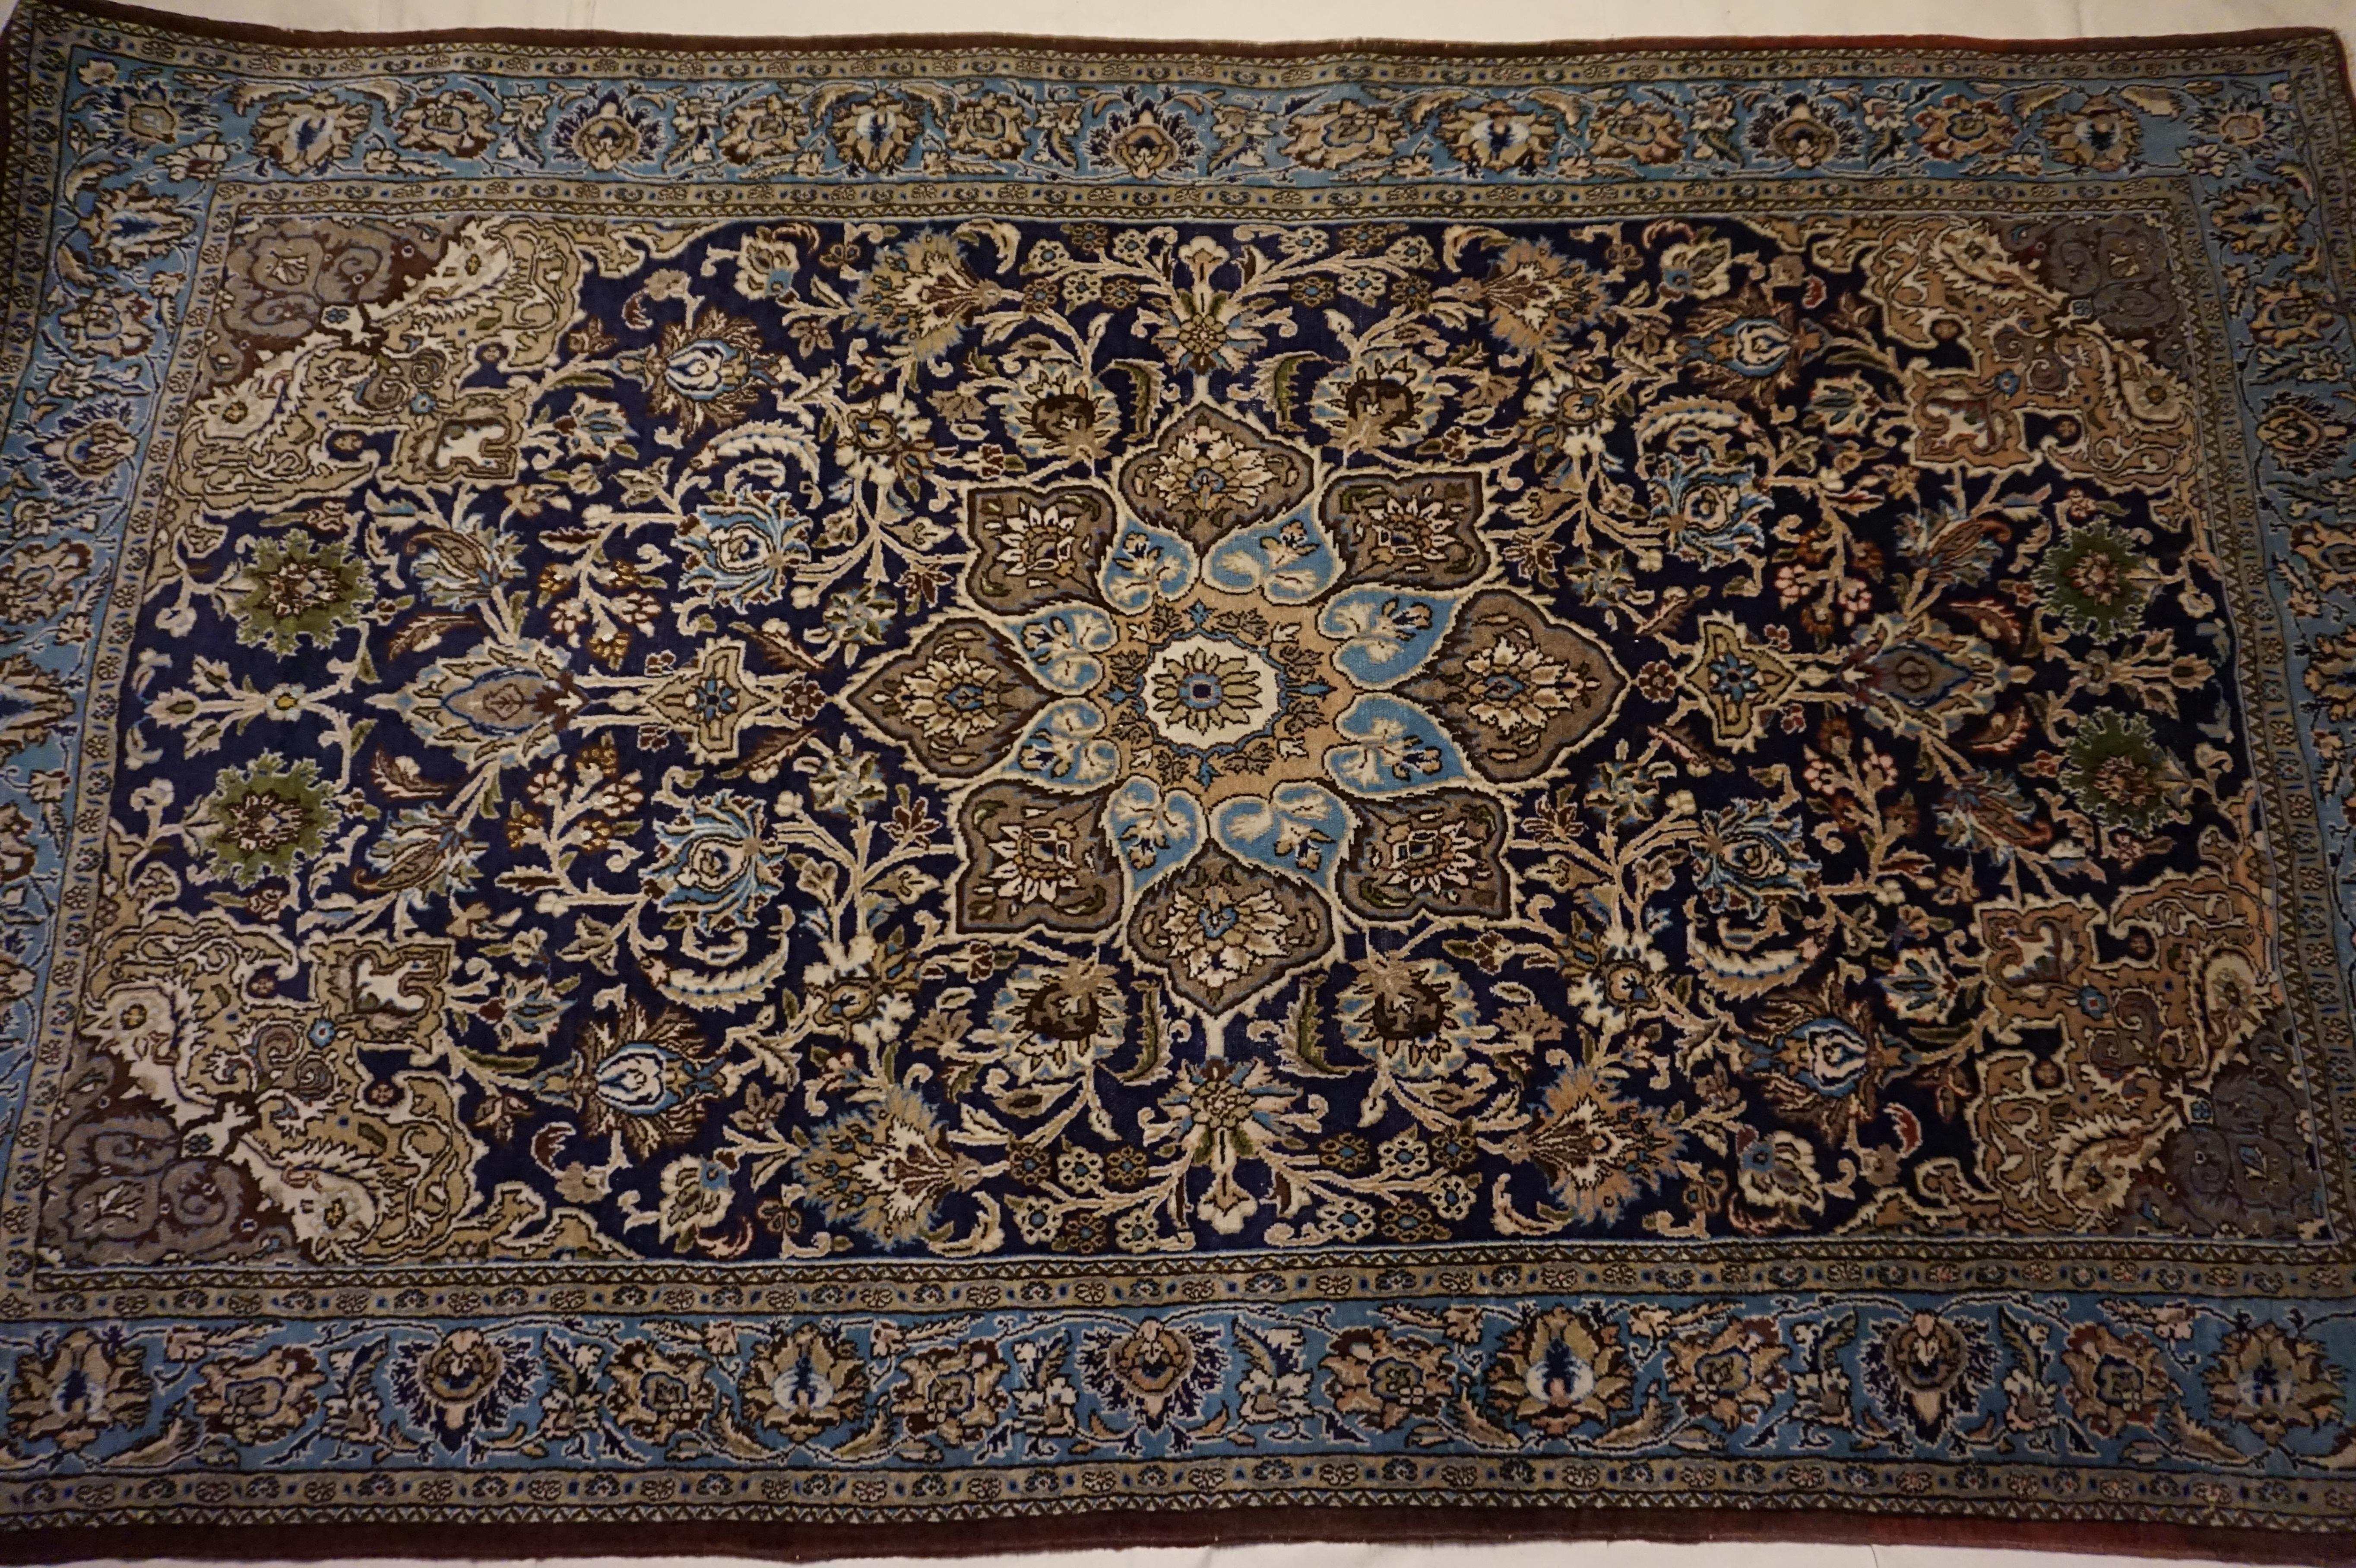 Antique Kashmir Kashan Rug Hand-knotted In Pure Wool In Indigo, Blues & Browns For Sale 3